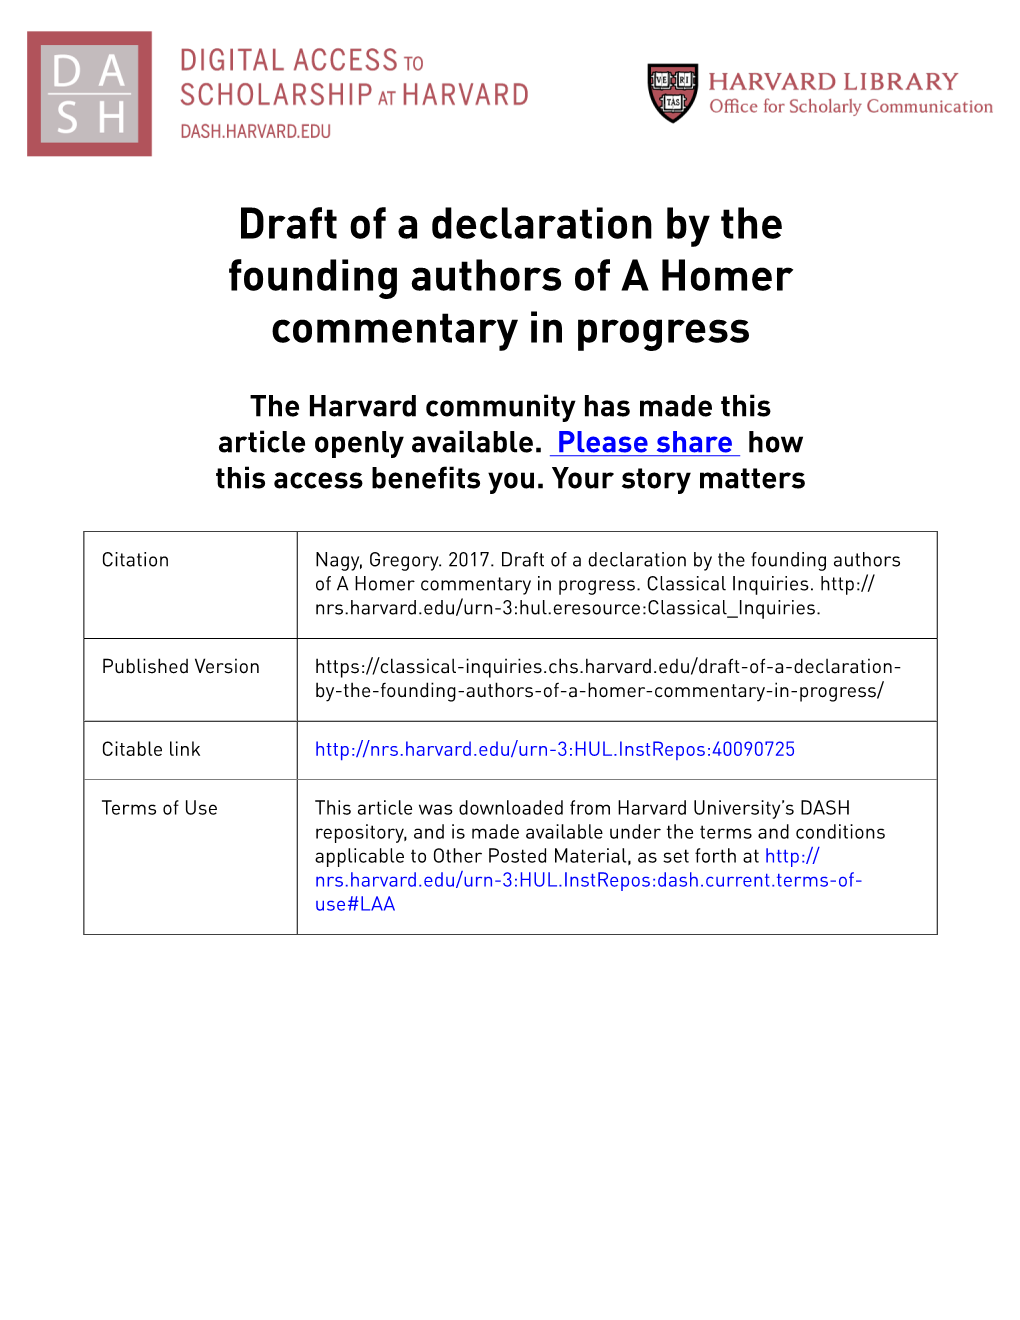 Draft of a Declaration by the Founding Authors of a Homer Commentary in Progress